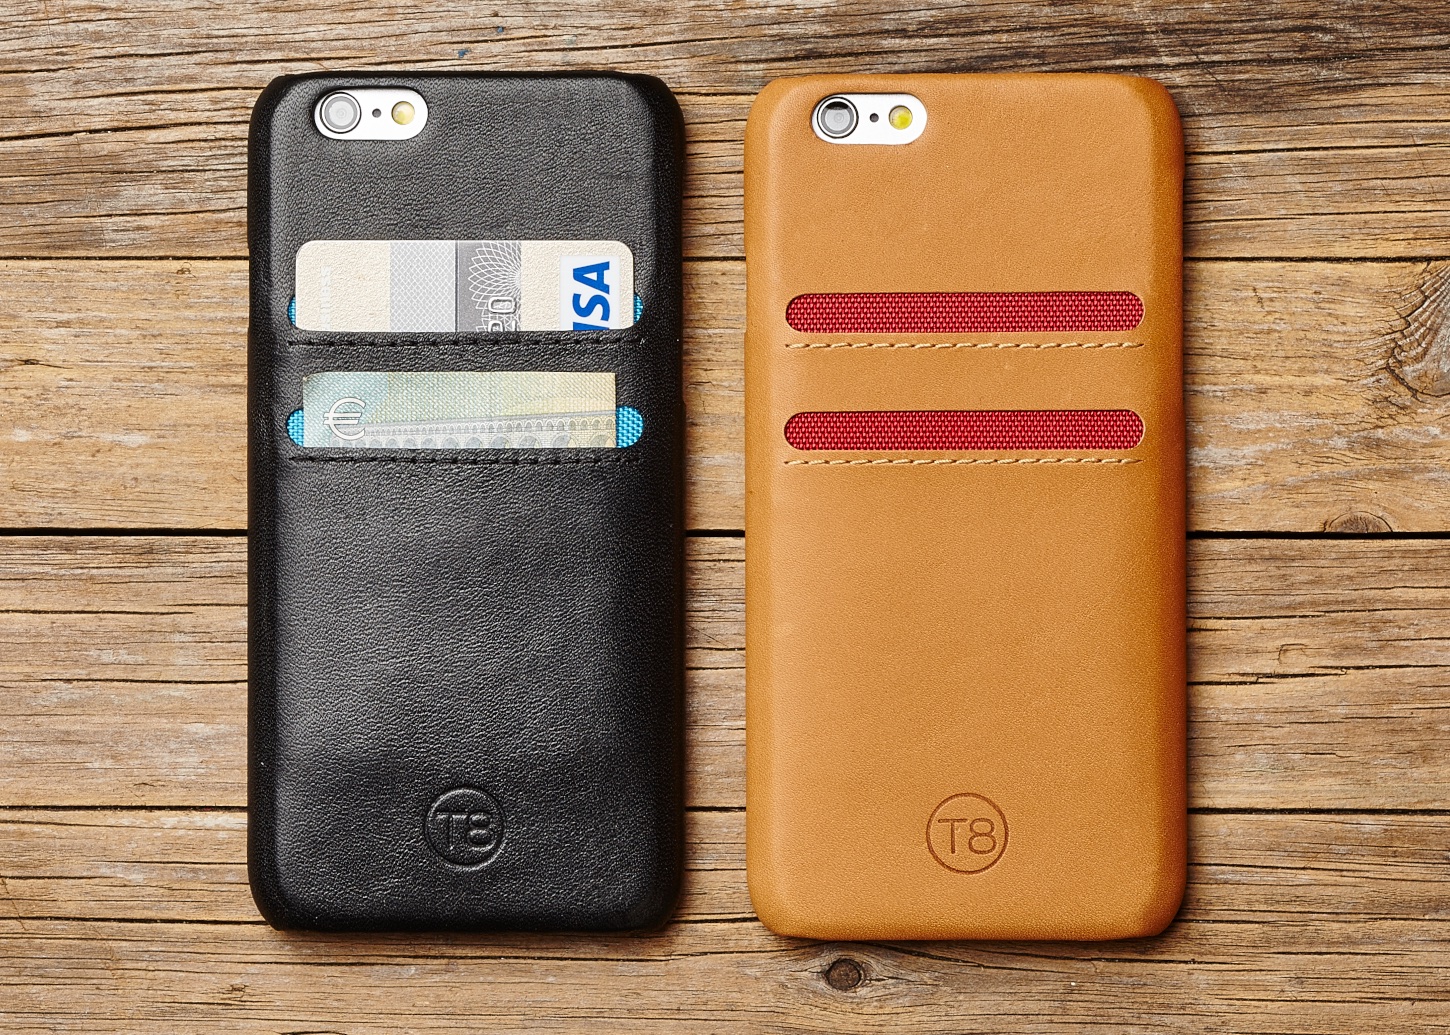 T8's SALT wallet case protects the iPhone 6 in a slim, beautiful package